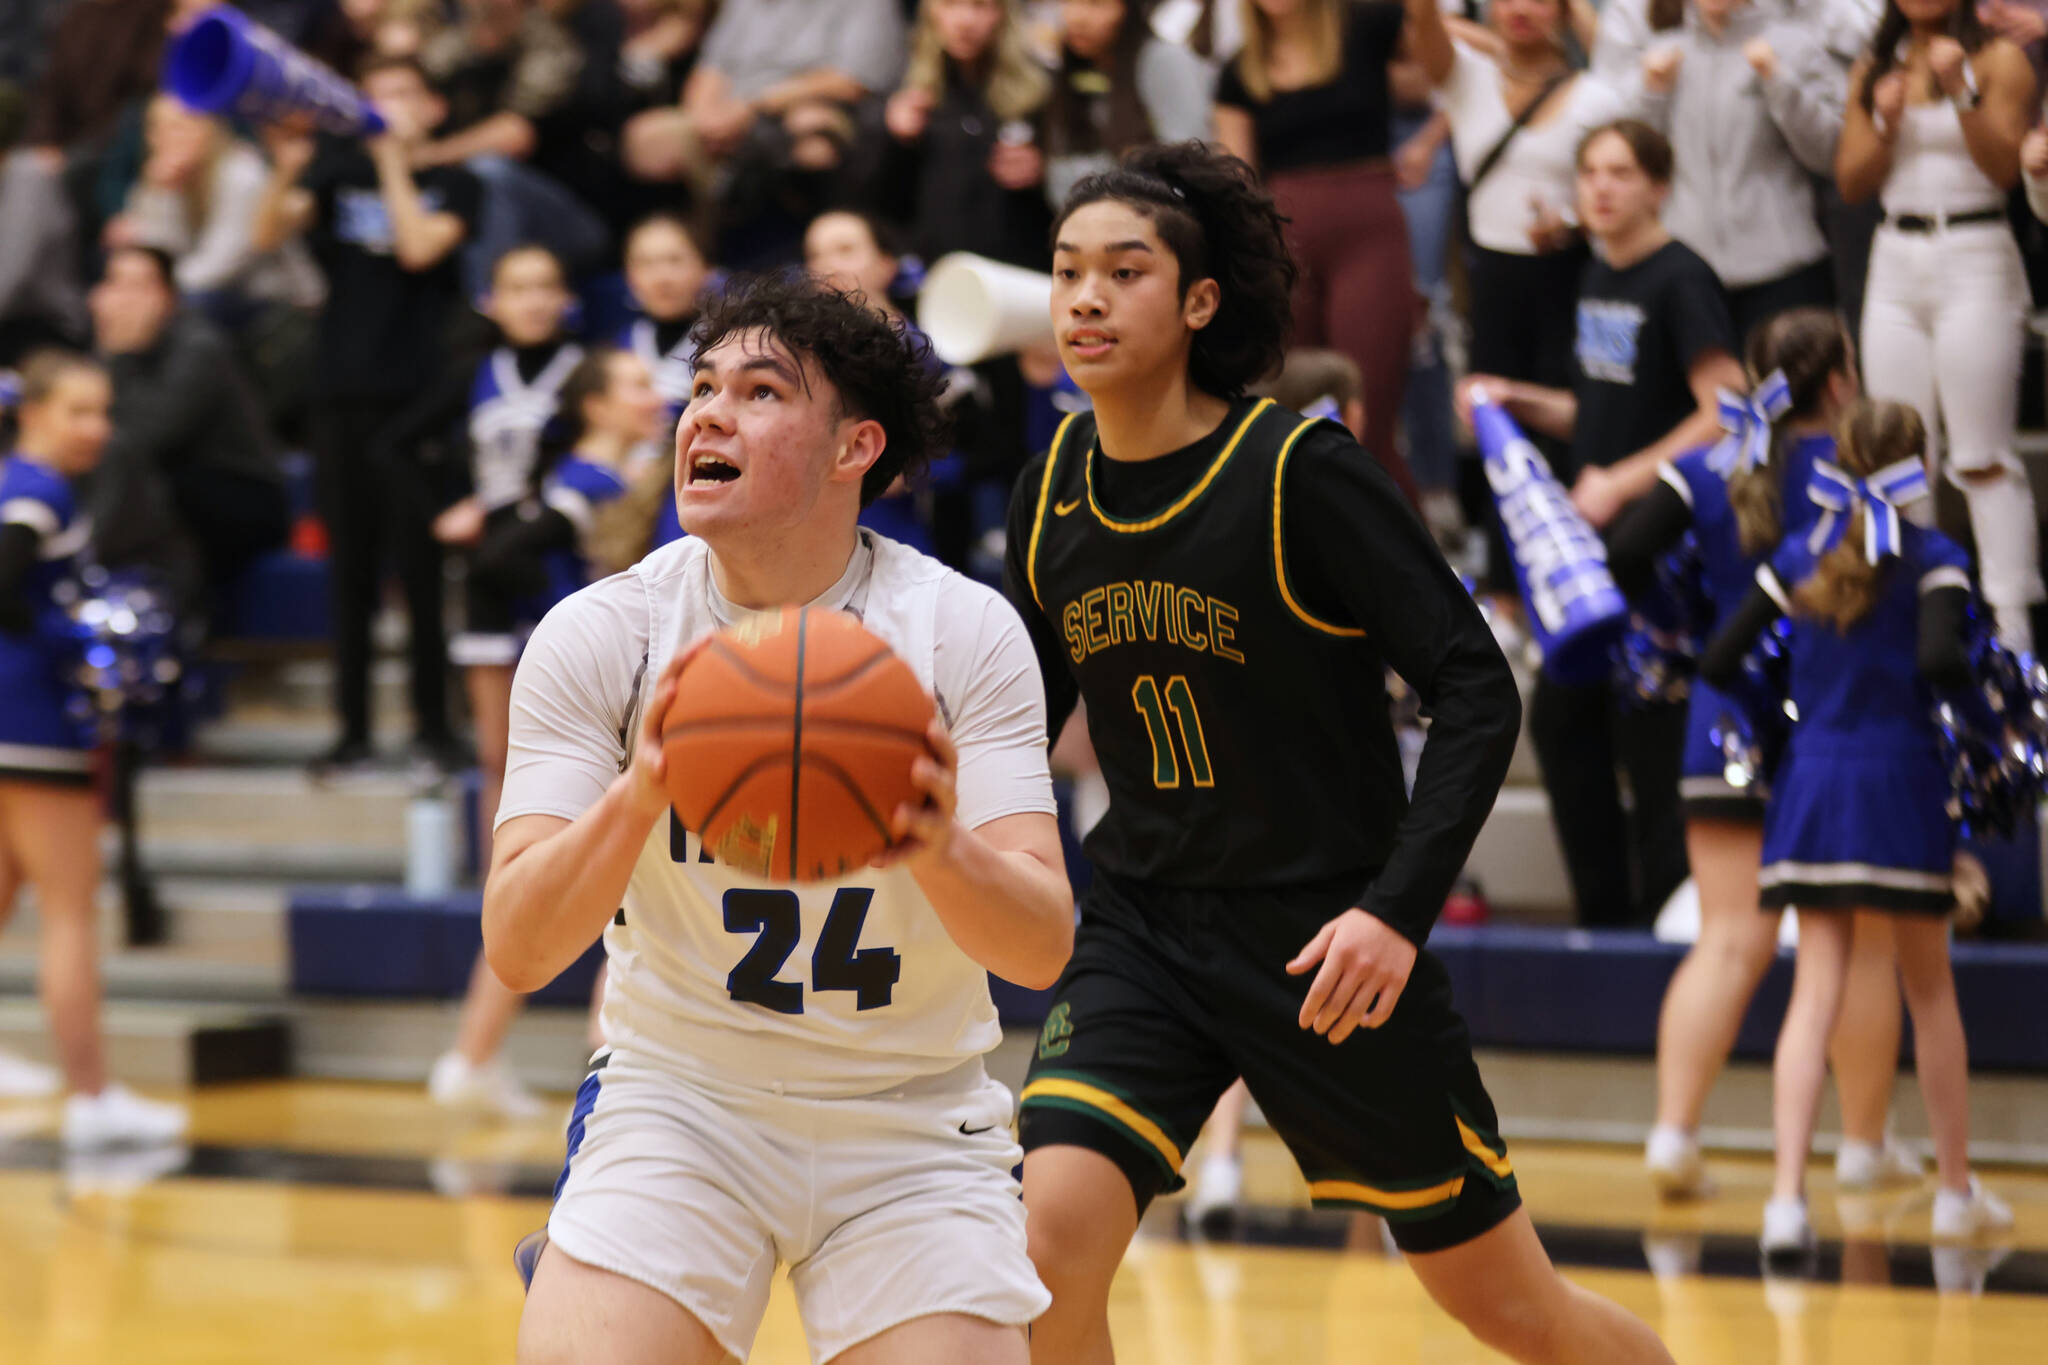 TMHS senior MJ Tupou prepares for a contested shot at the hoop during a game against Service High School. (Ben Hohenstatt / Juneau Empire)